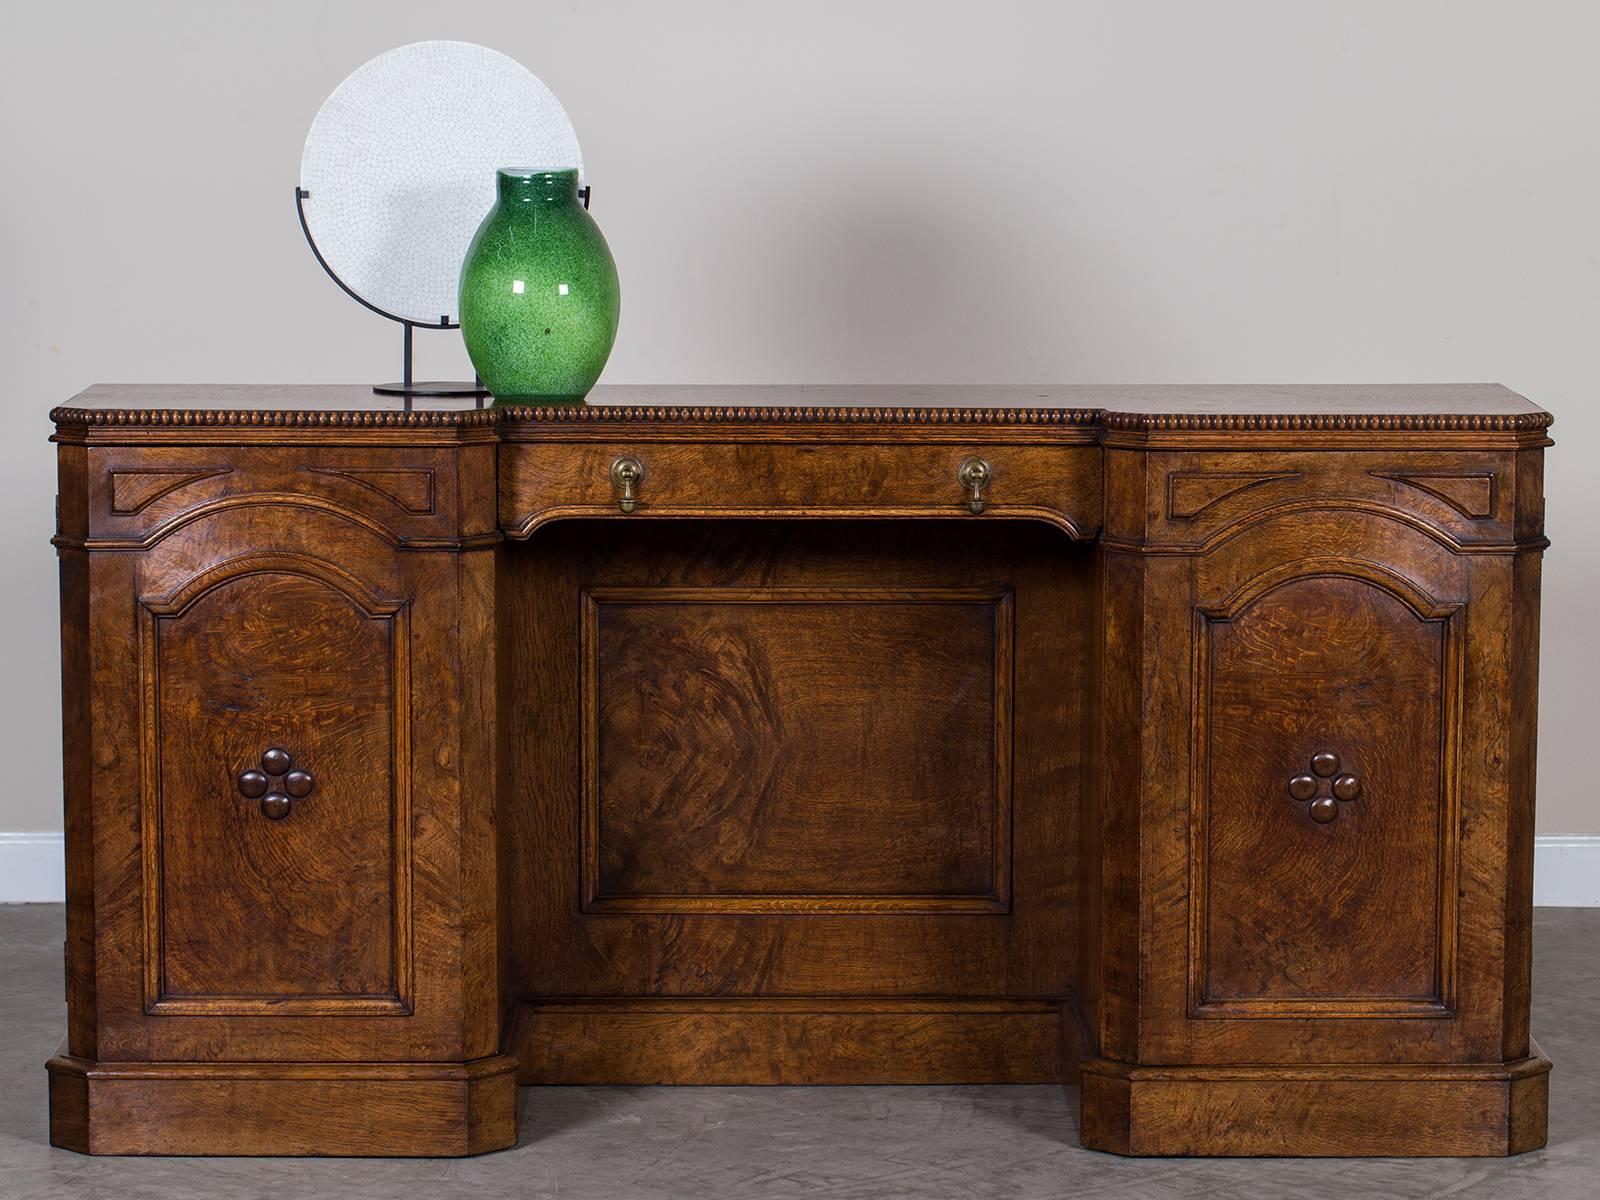 Receive our new selections direct from 1stdibs by email each week. Please click on “Follow Dealer” button below and see them first!

This handcrafted pollard oak antique English buffet credenza, circa 1865 possesses a unique shape and colour along